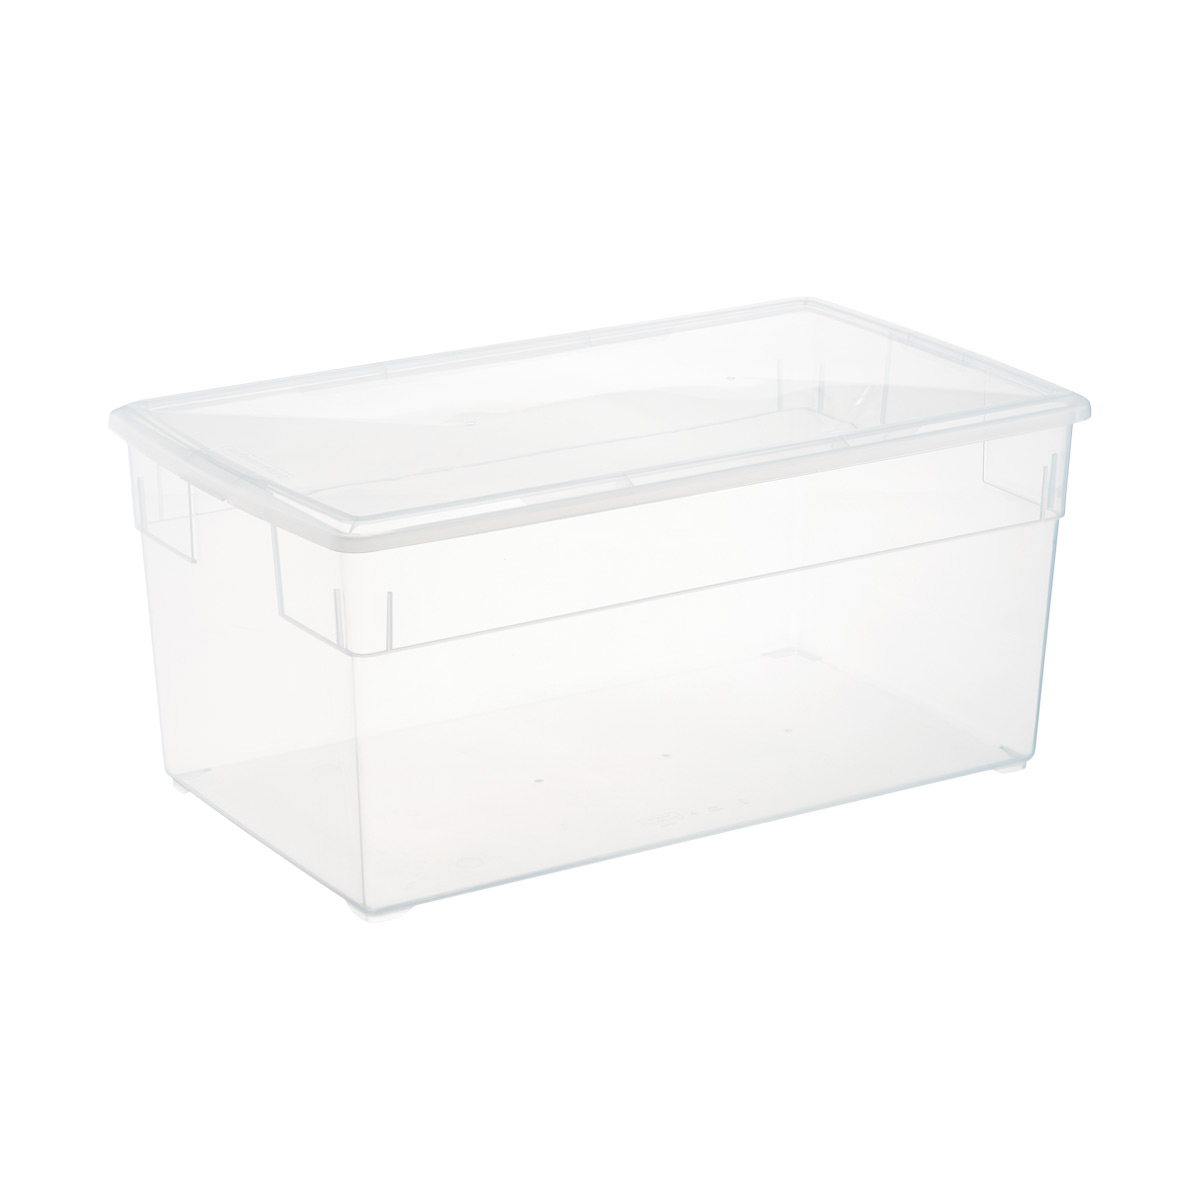 Our Clear Storage Boxes The Container, Clear Storage Containers With Lids